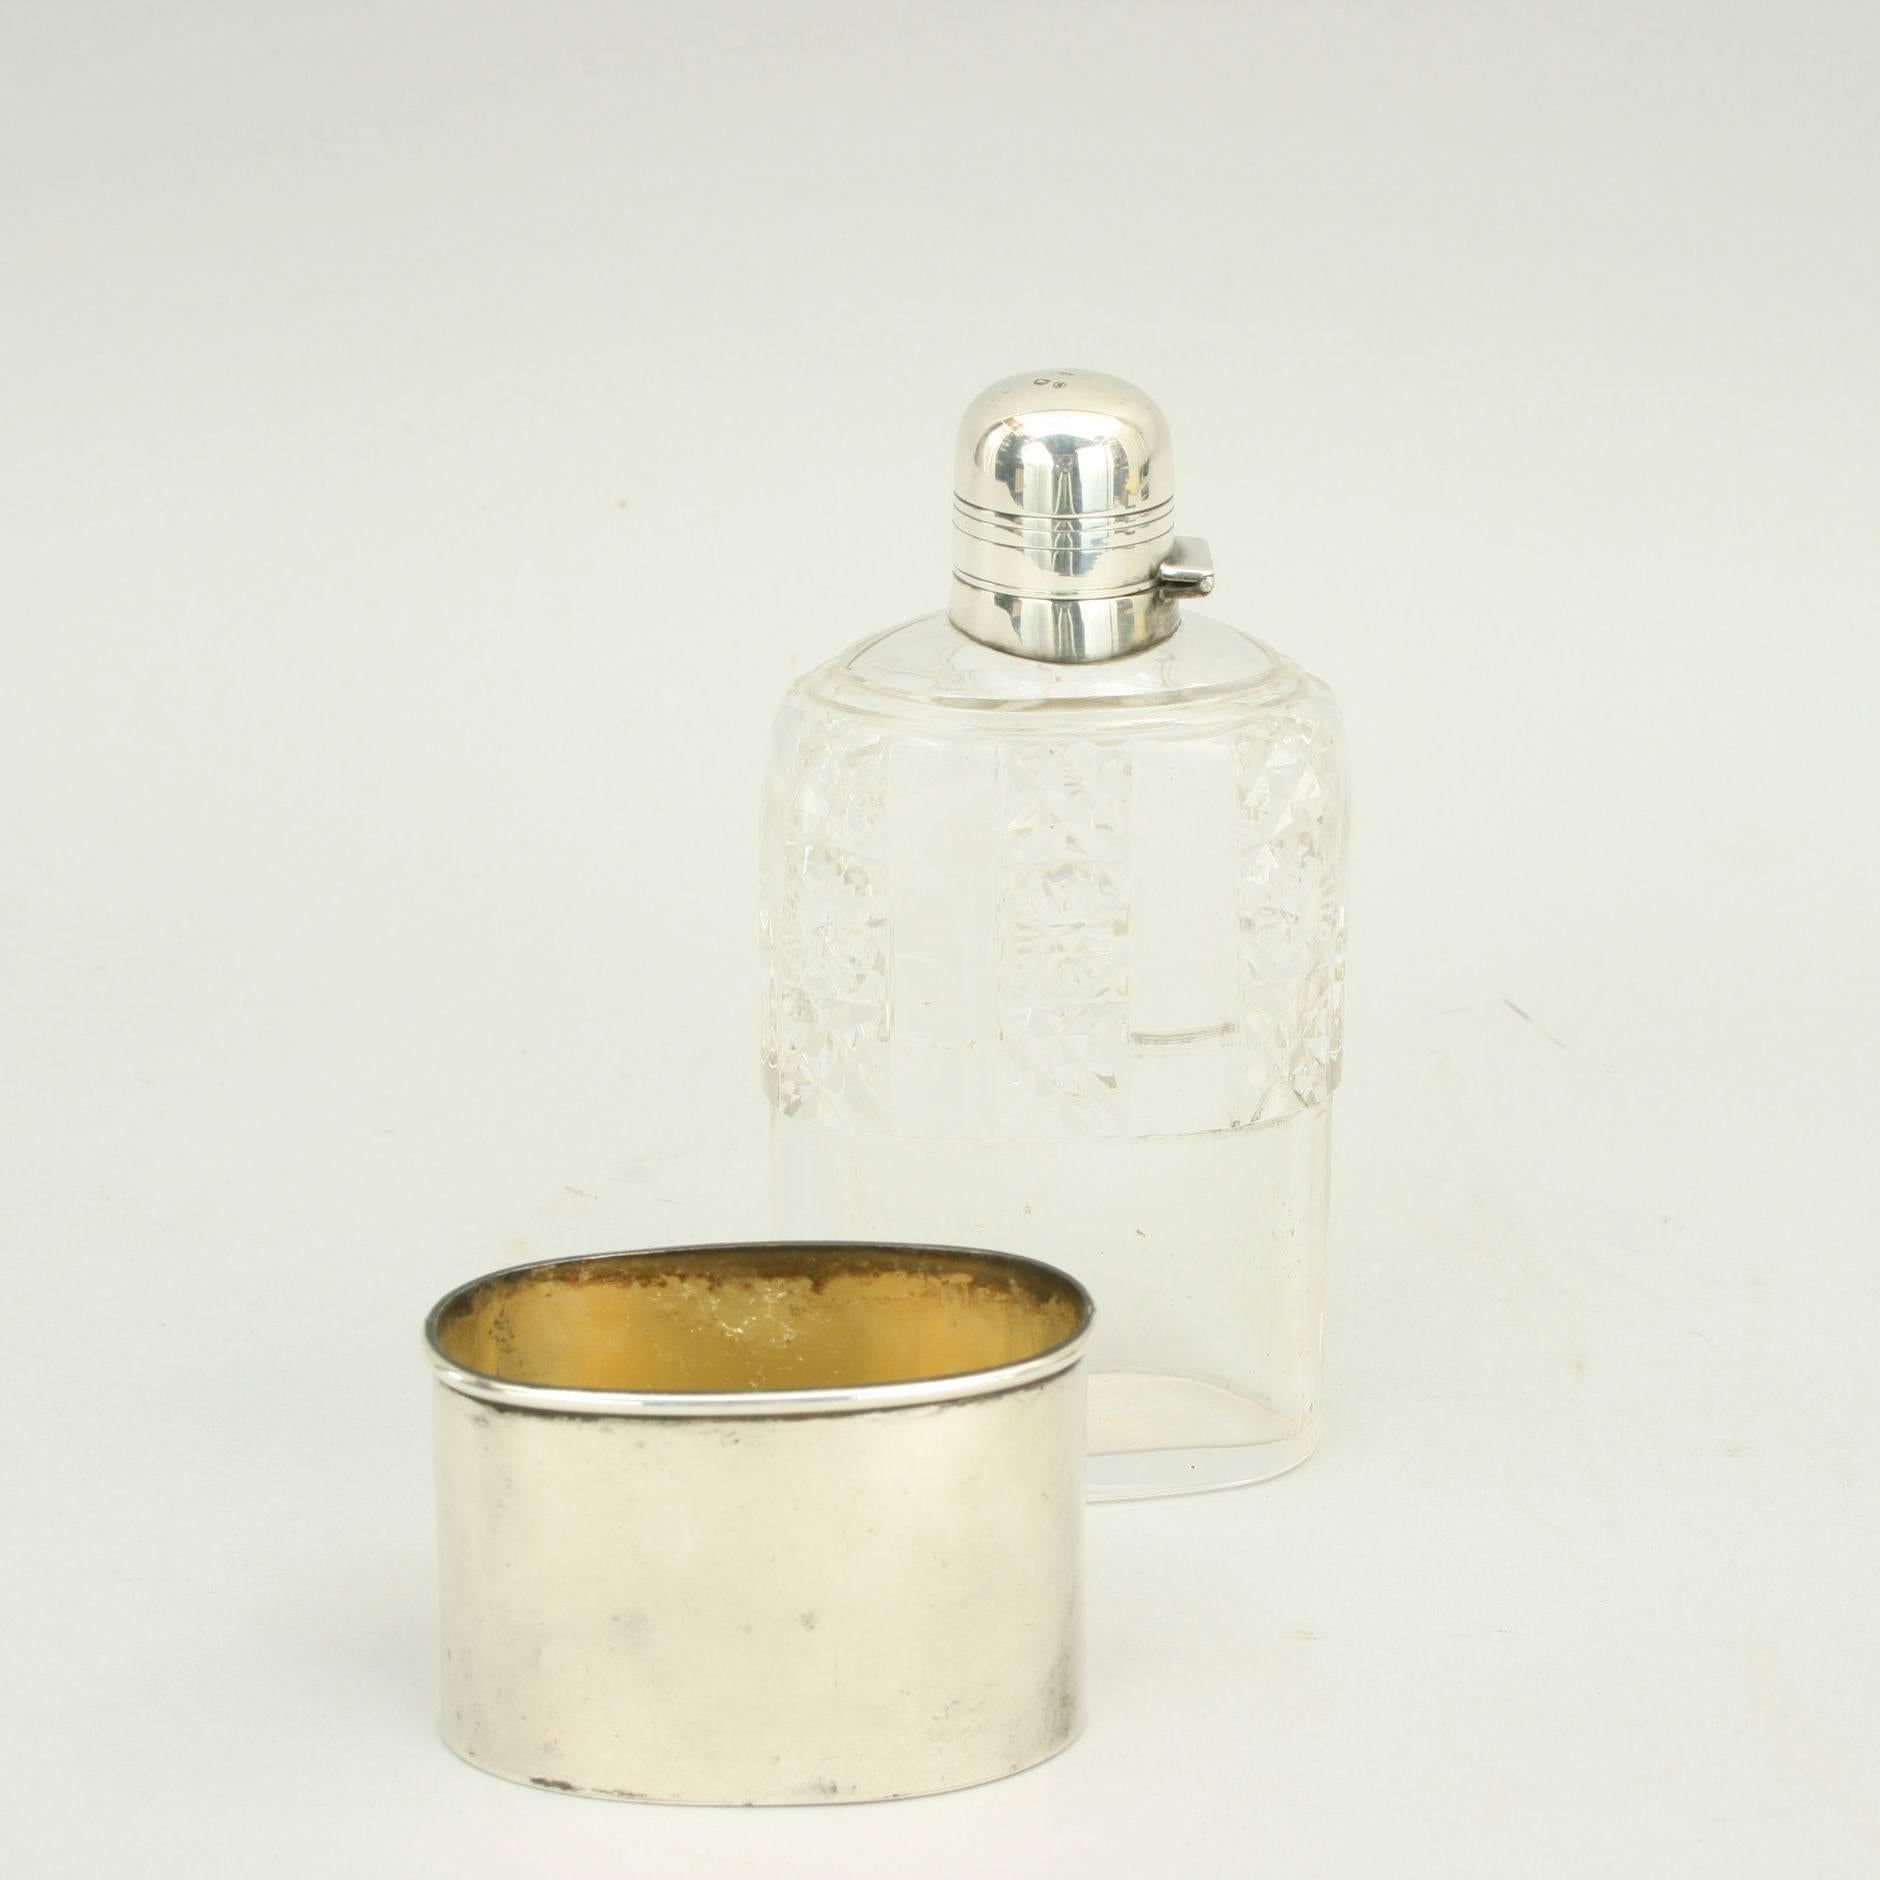 Silver and glass hip flask.
A very nice Victorian silver and cut glass hip flask hallmarked London 1889, makers initials T.W, the silver cup with gilded interior.